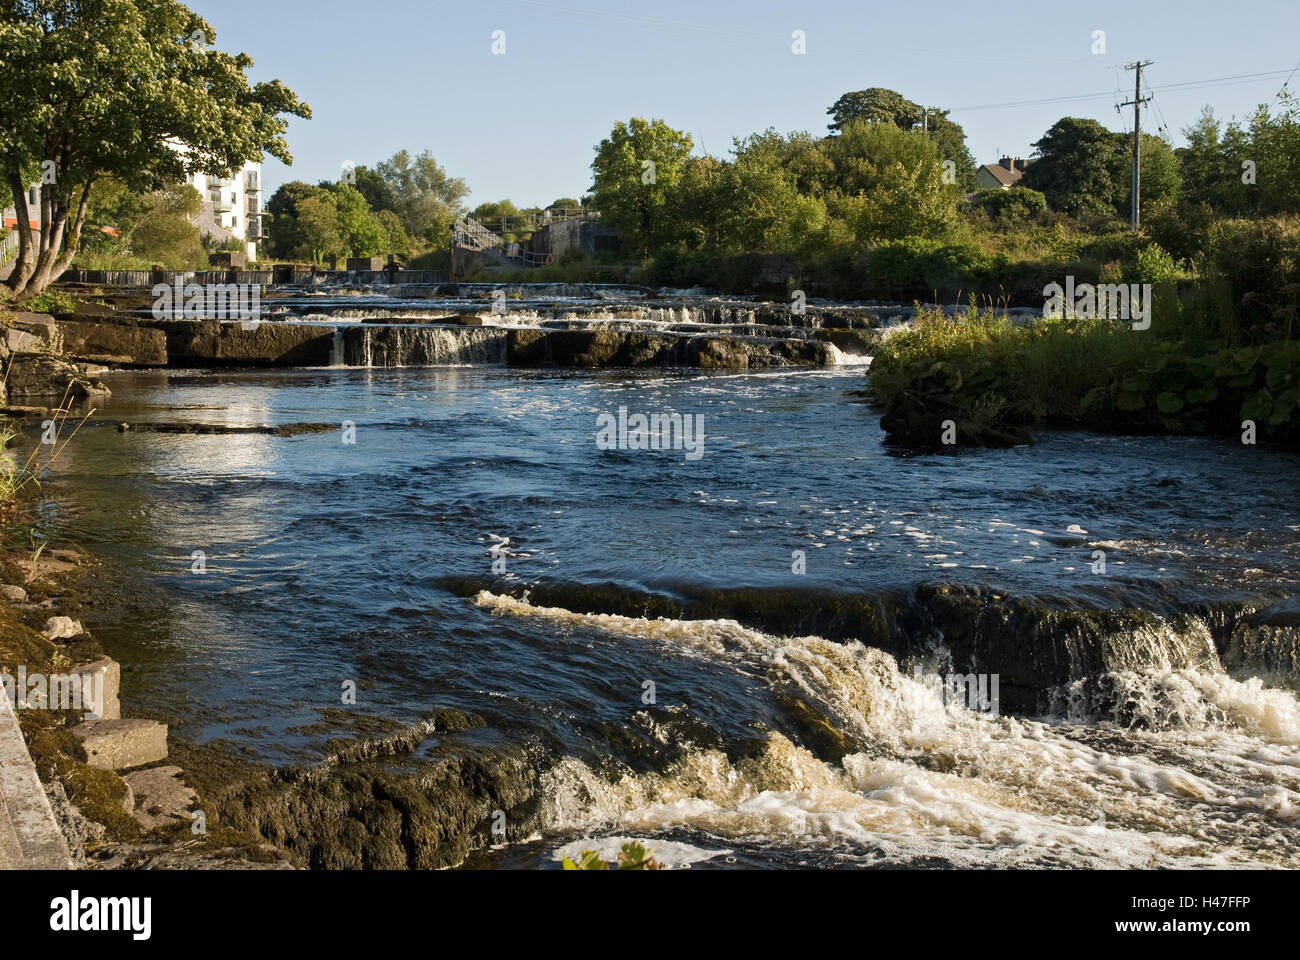 OWENMORE RIVER, BALLYSADARE, SLIGO WHERE POLLEXFEN MILL, OWNED BY POET, DRAMATIST AND NOBEL PRIZE WINNER IN LITERATURE, WILLIAM BUTLER YEATS GRANDFATHER WAS SITUATED. REFERRED TO BY YEATS IN 'THE CELTIC TWILIGHT' Stock Photo